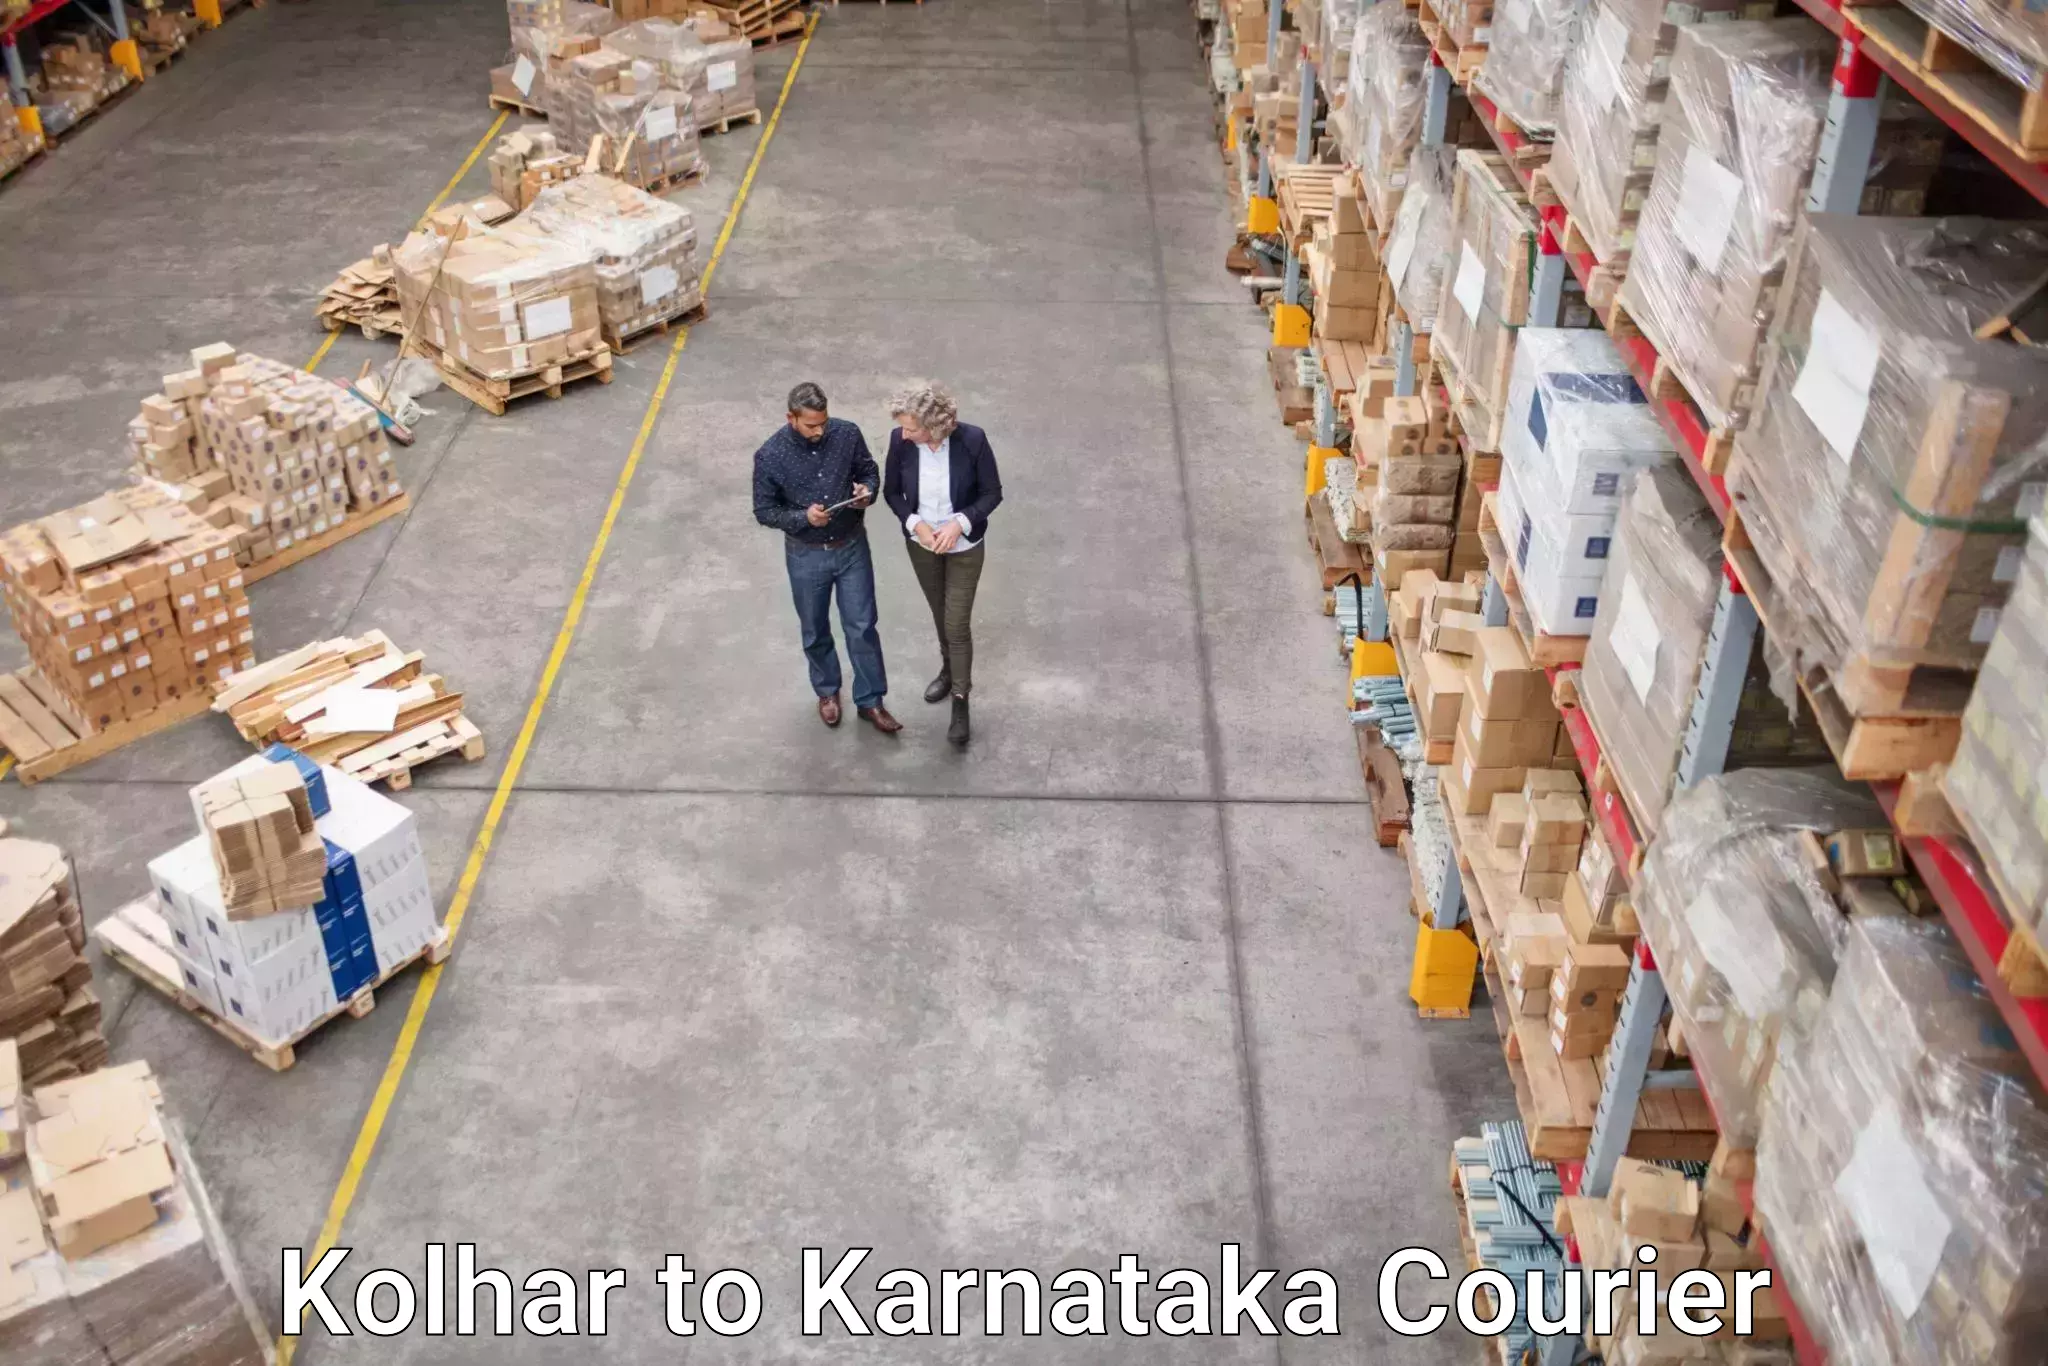 Nationwide shipping capabilities in Kolhar to Manipal Academy of Higher Education